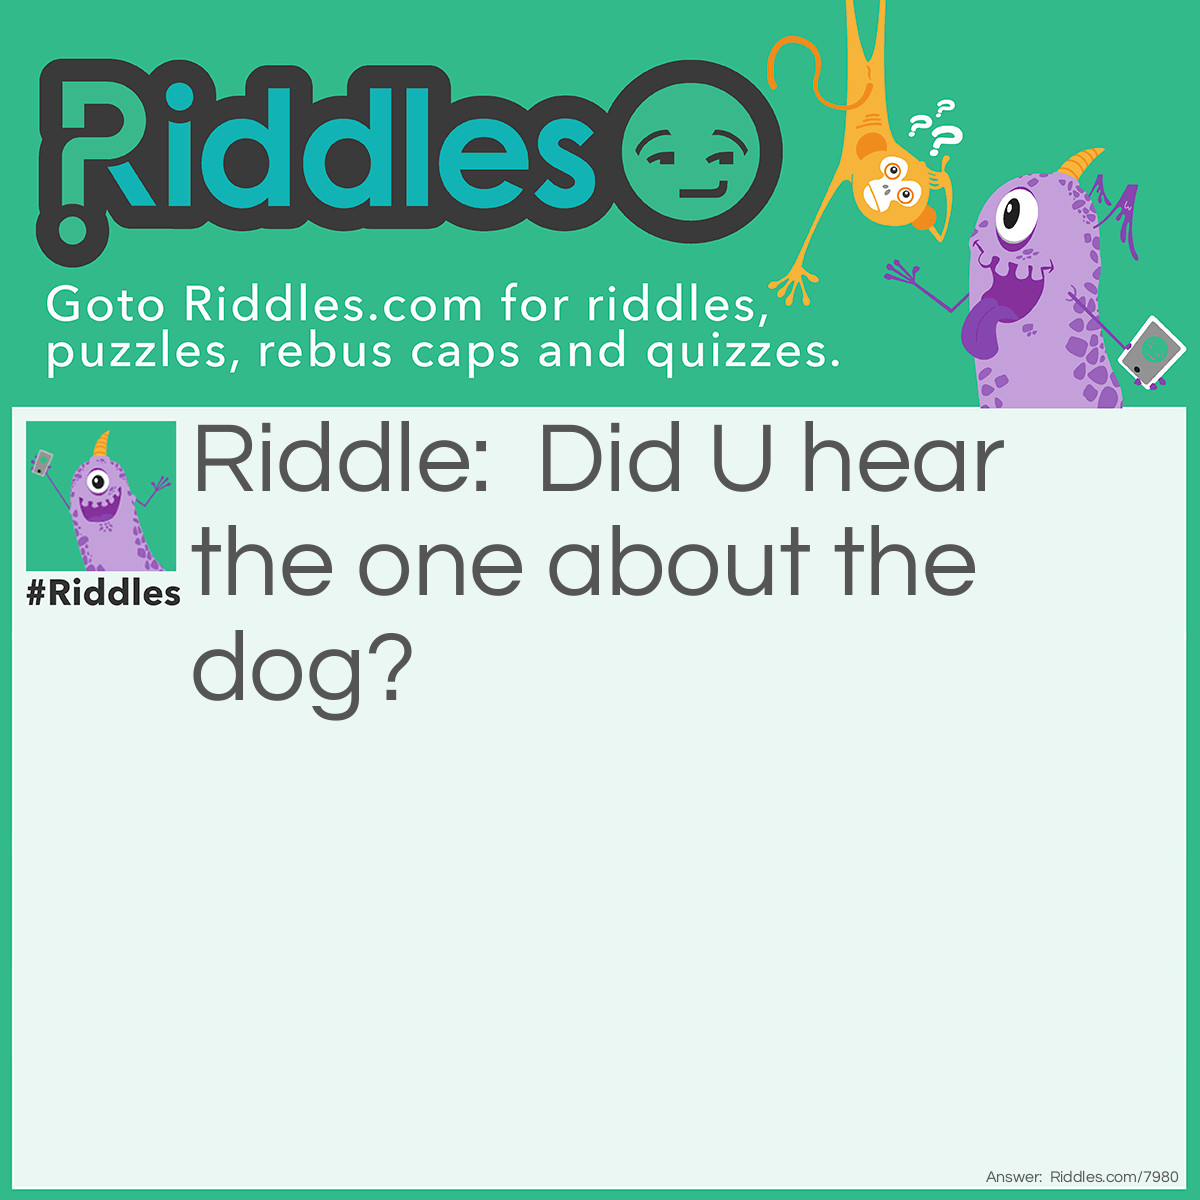 Riddle: Did U hear the one about the dog? Answer: Neither did I (laughing).